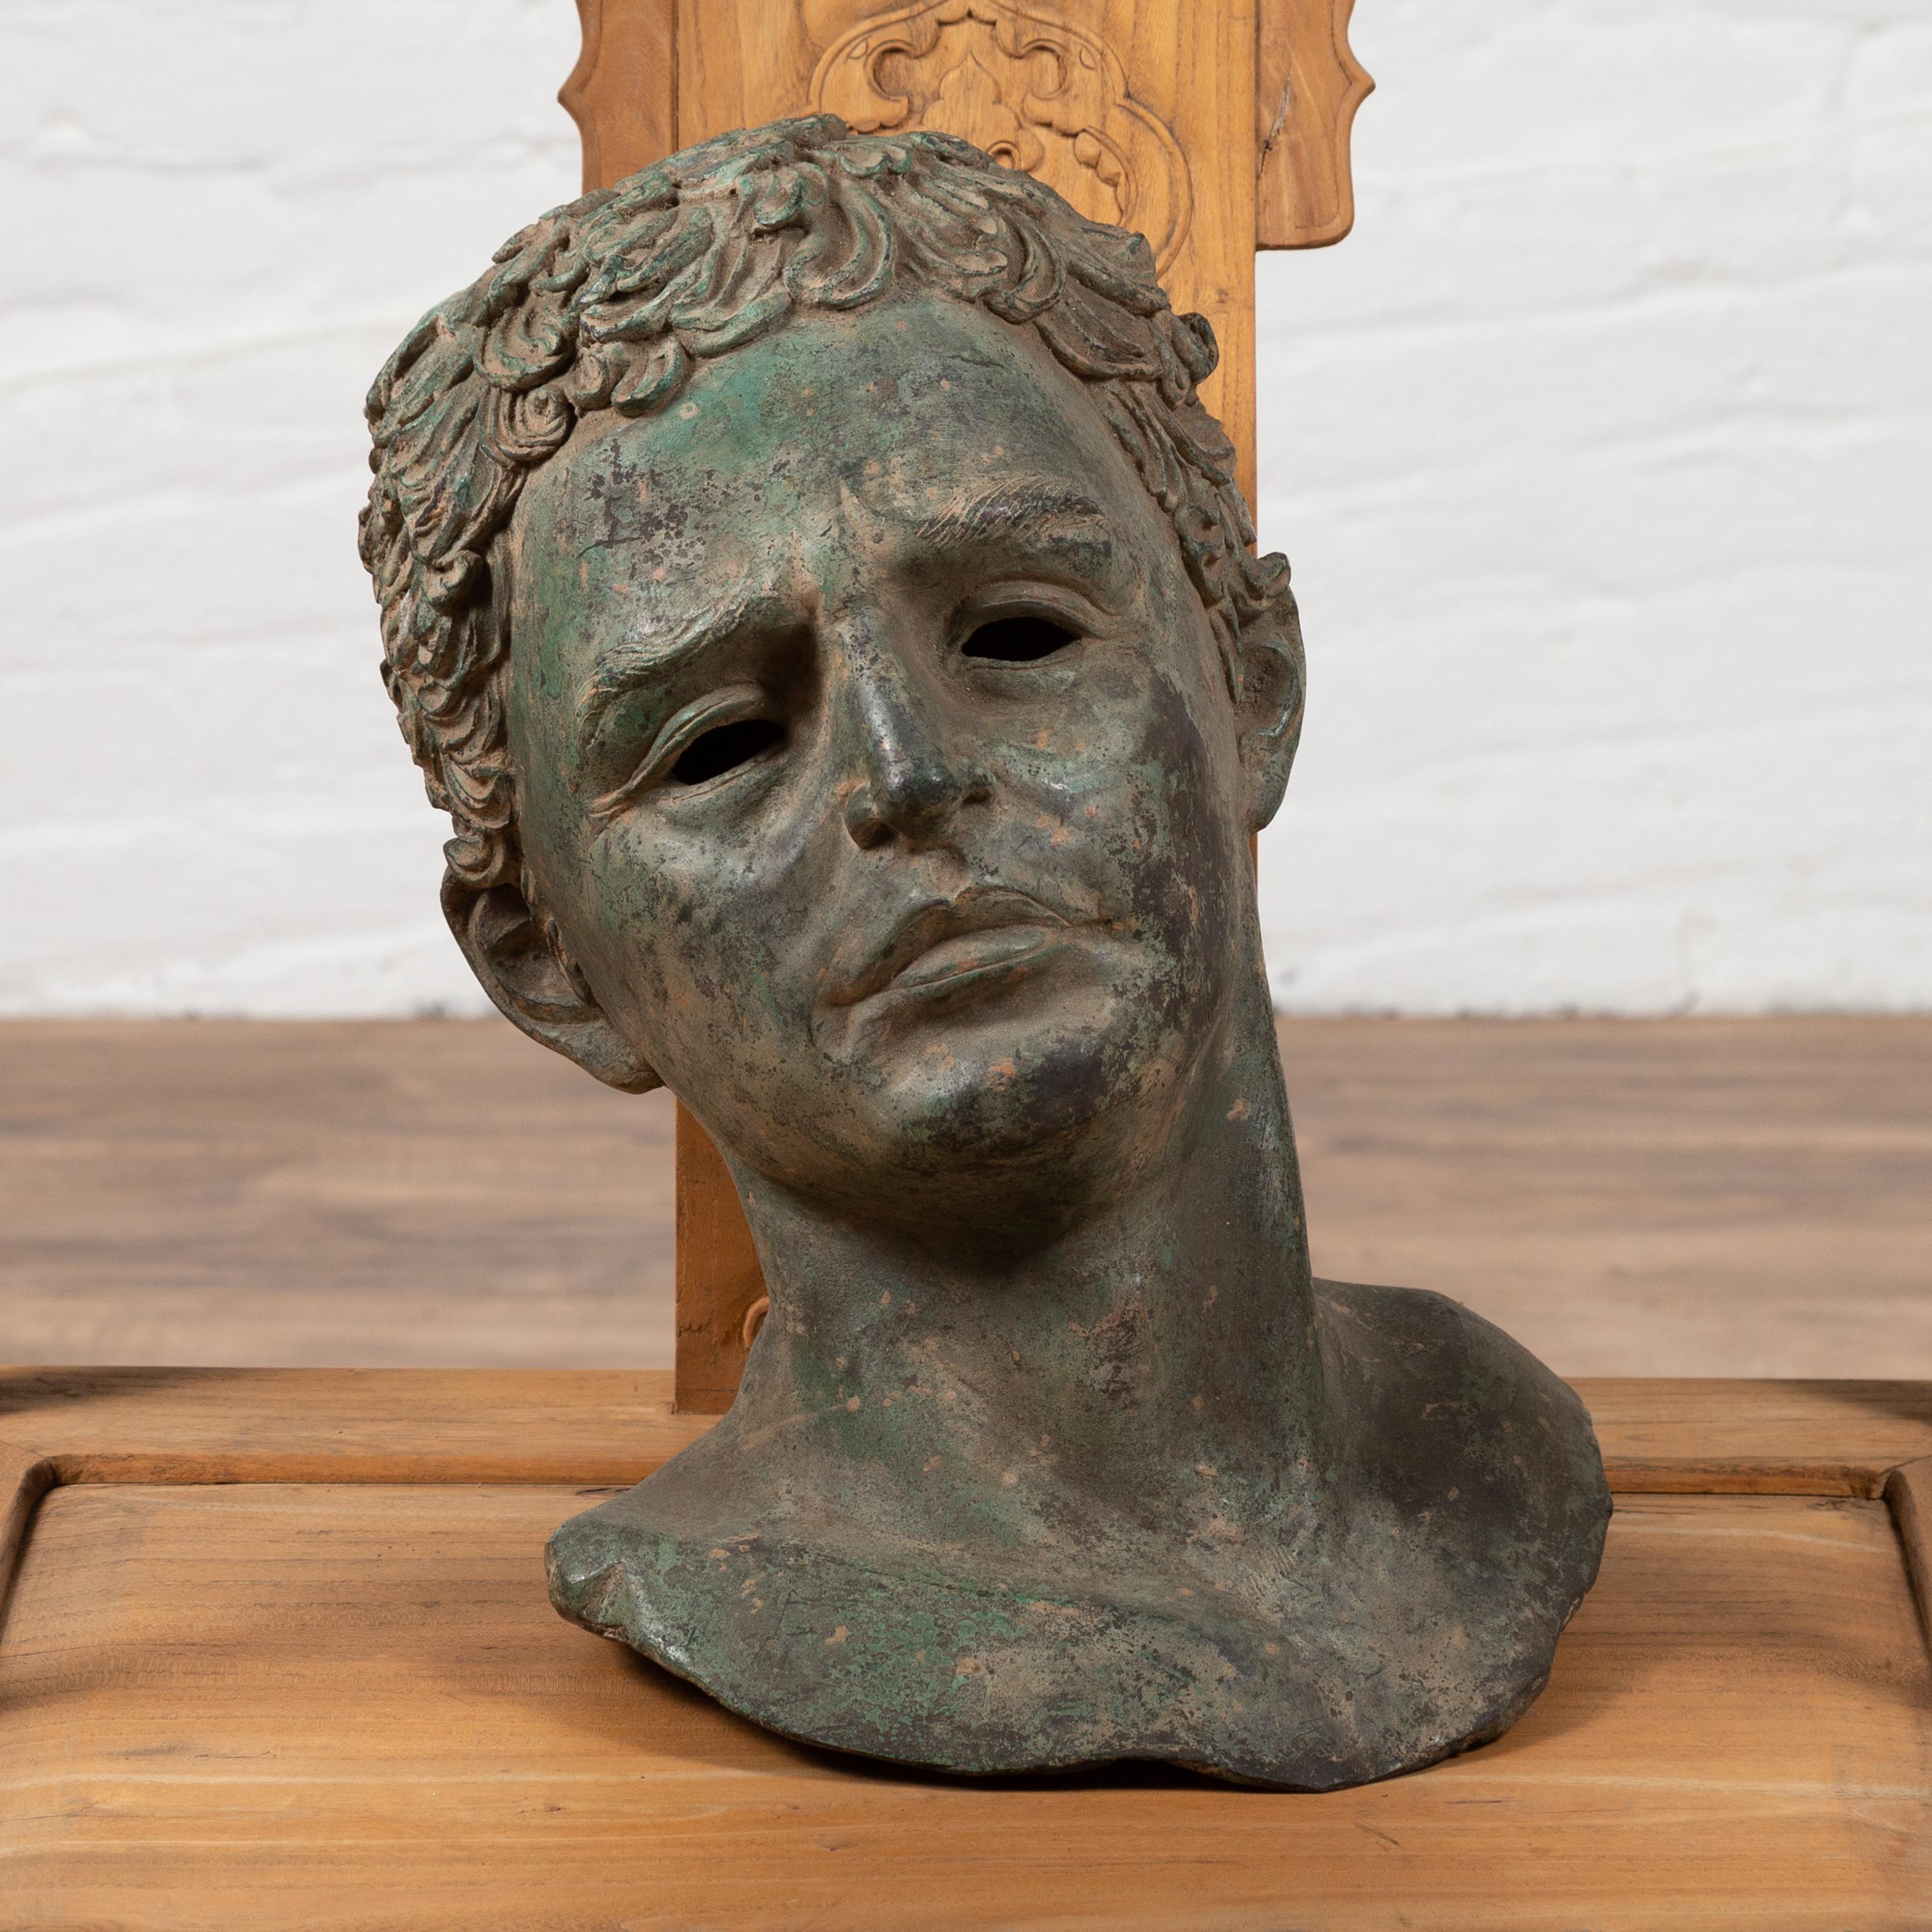 A vintage bronze bust of a Roman philosopher from the mid-20th century, with green oxidized patina and great details. Born during the midcentury period, this exquisite bronze bust depicts a handsome Roman philosopher featuring a stunning verdigris